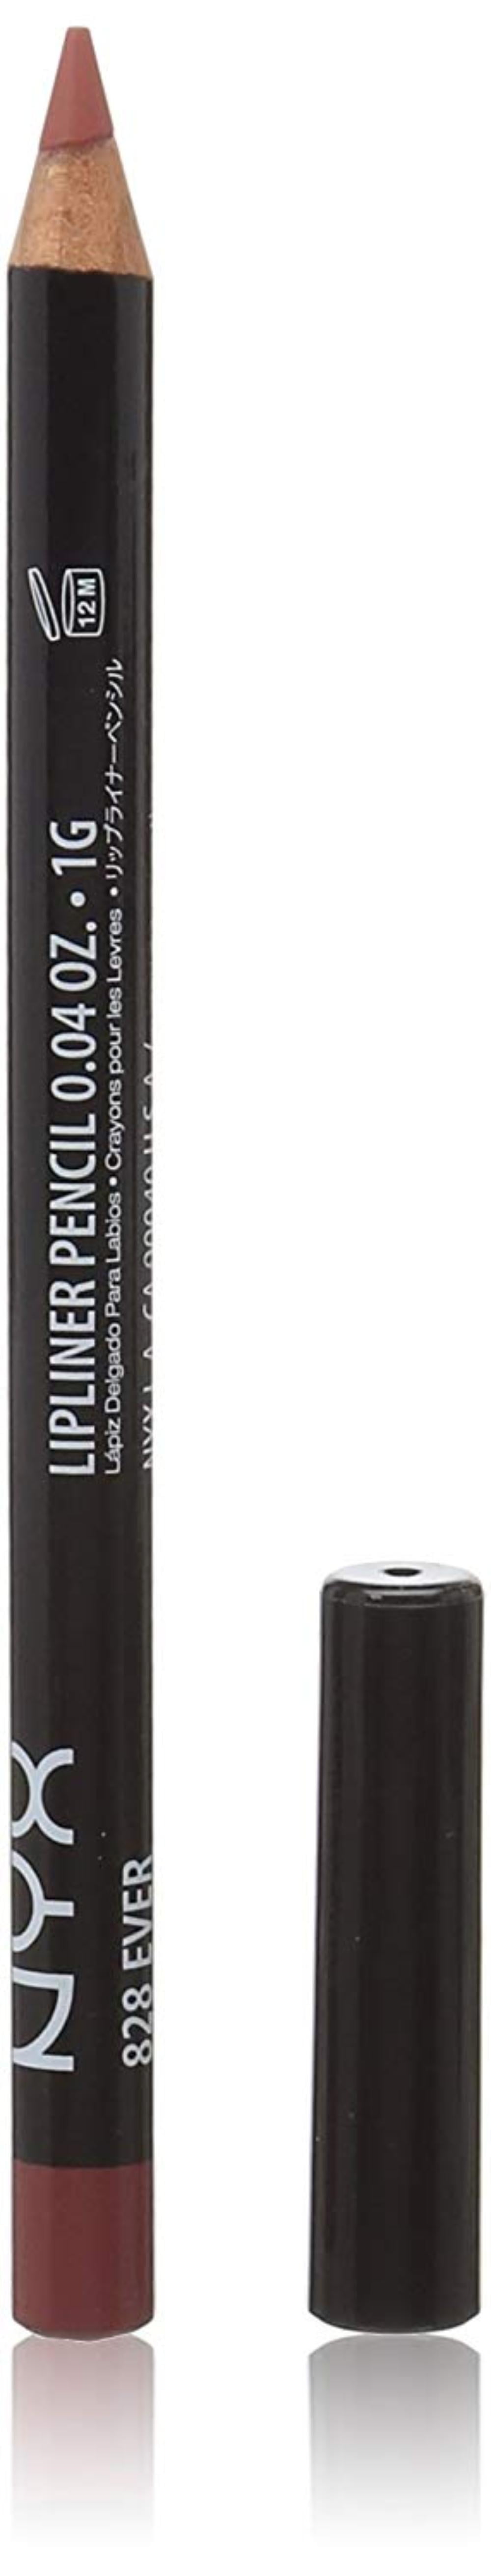 Liner pencil nyx slim every lip 828 ruching the back